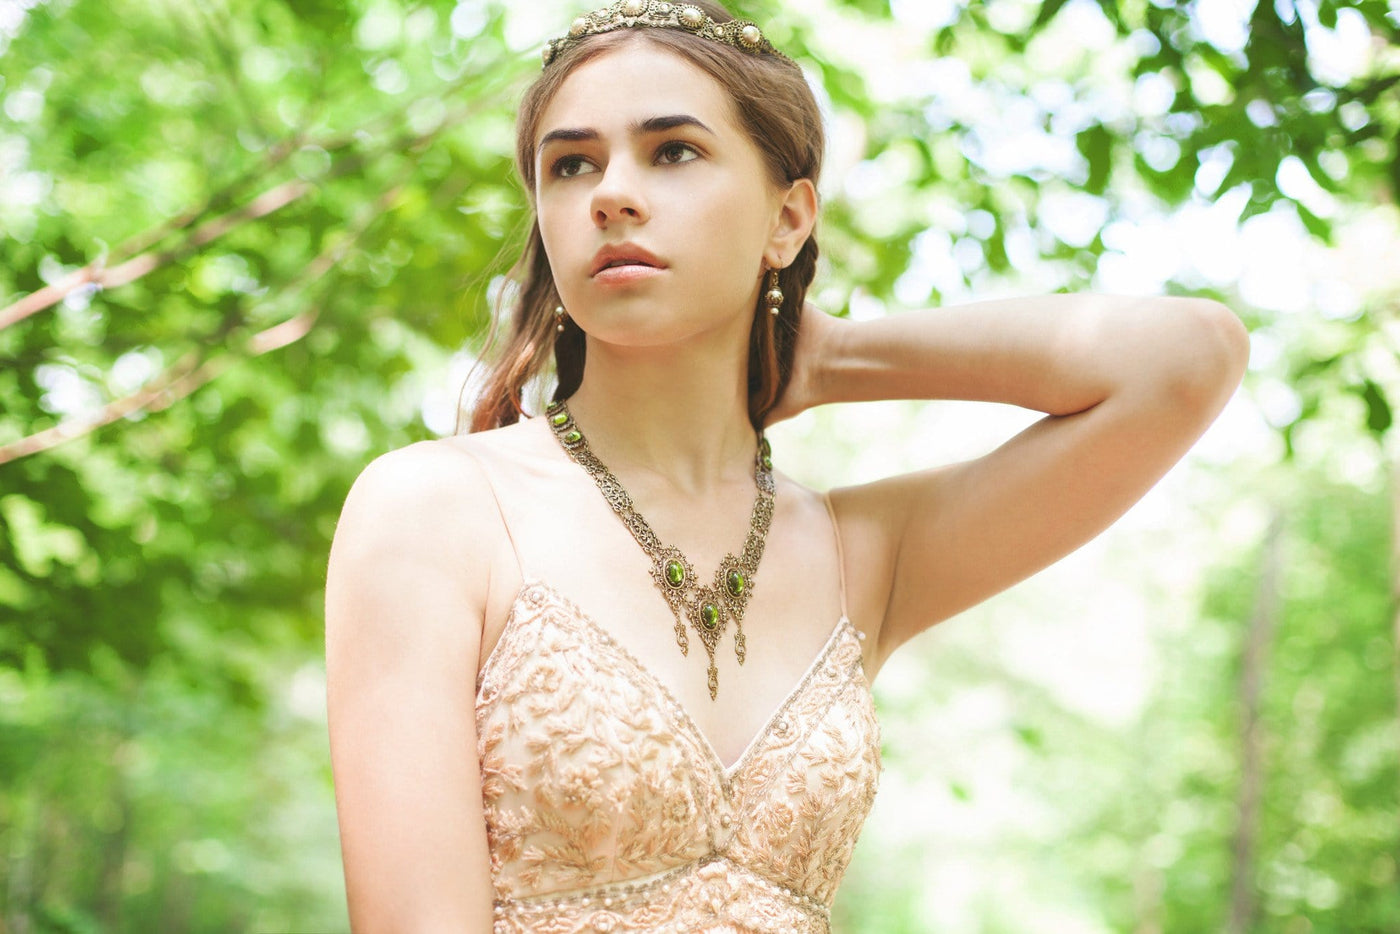 Chateau Necklace in Olivine and Antiqued Brass by Rabbitwood and Reason. Photo by La Candella Weddings